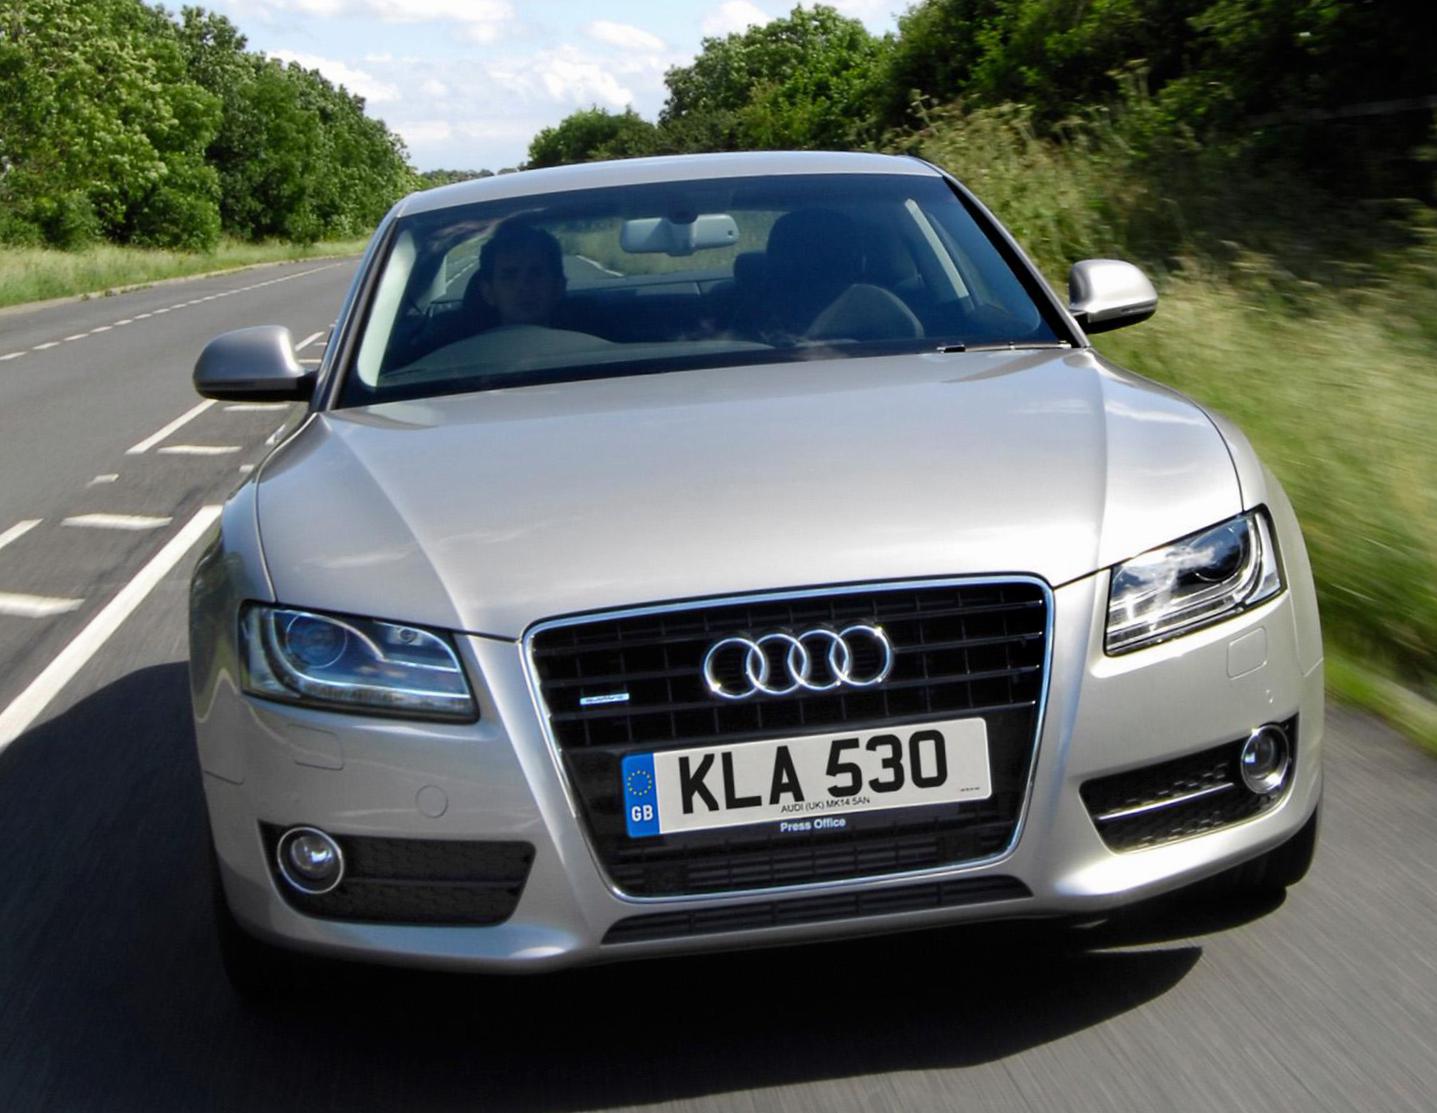 Audi A5 Coupe cost 2009